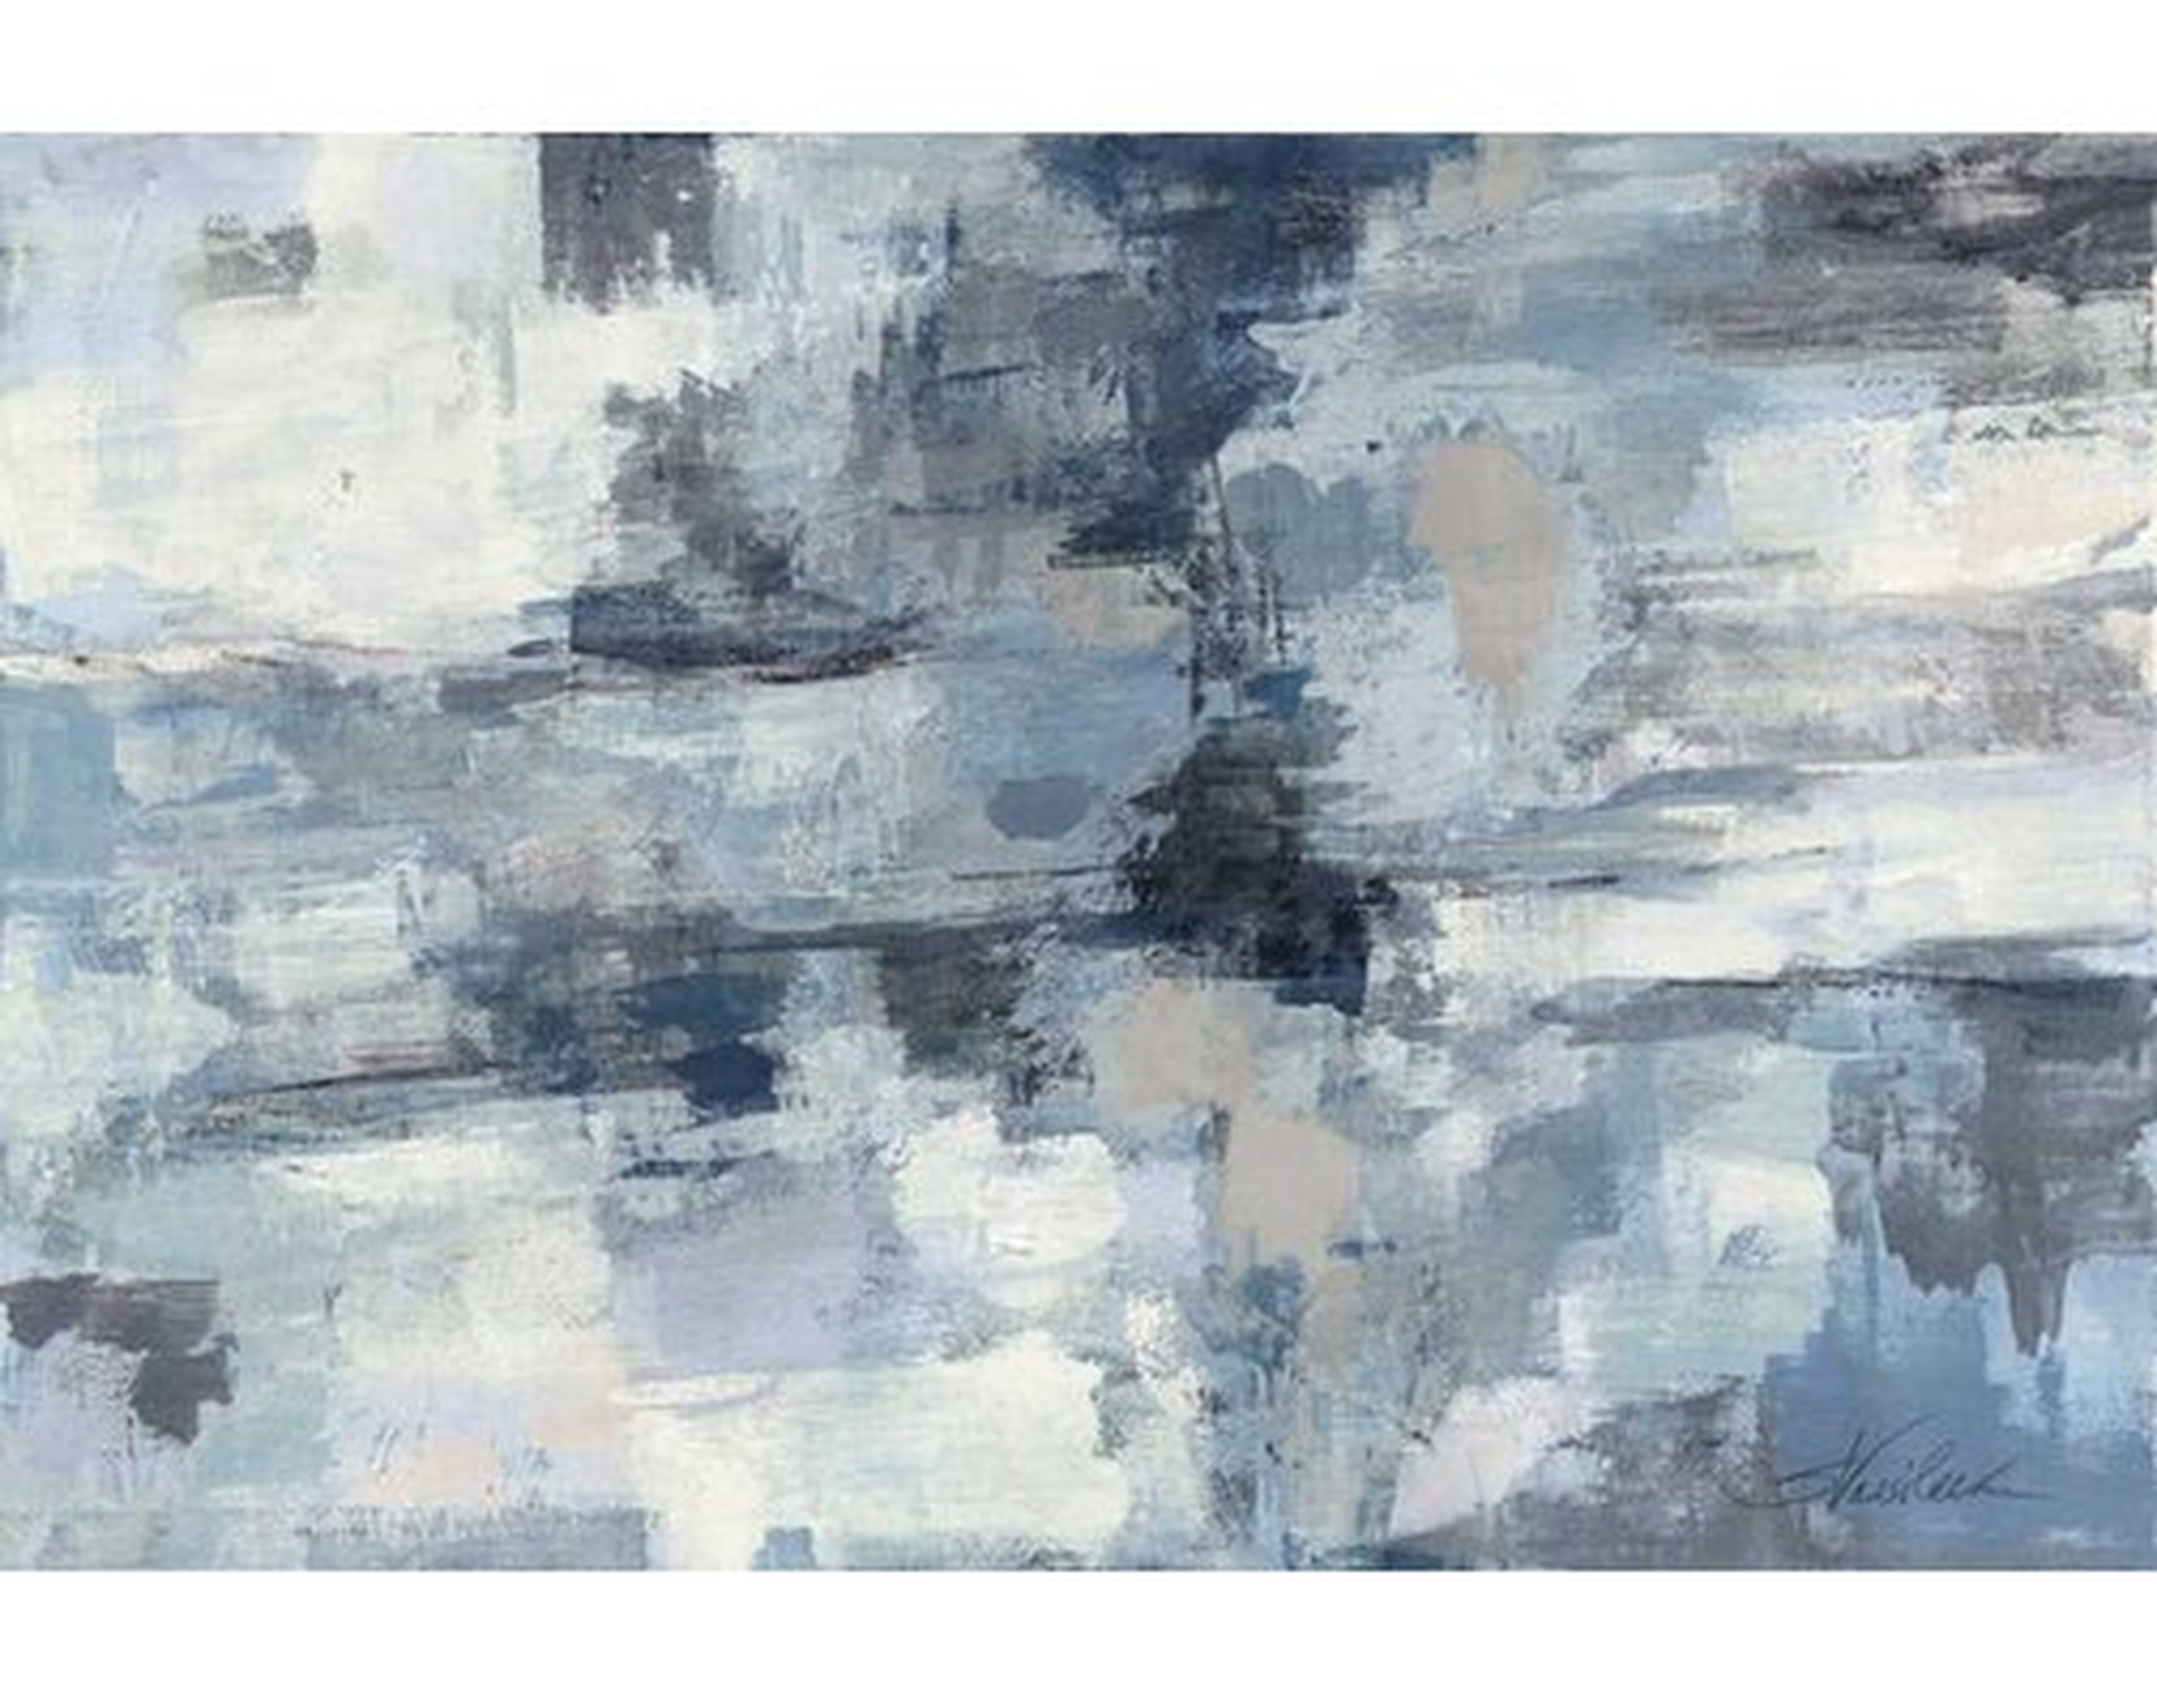 'IN THE CLOUDS' BY SILVIA VASSILEVA PAINTING PRINT ON CANVAS - Perigold